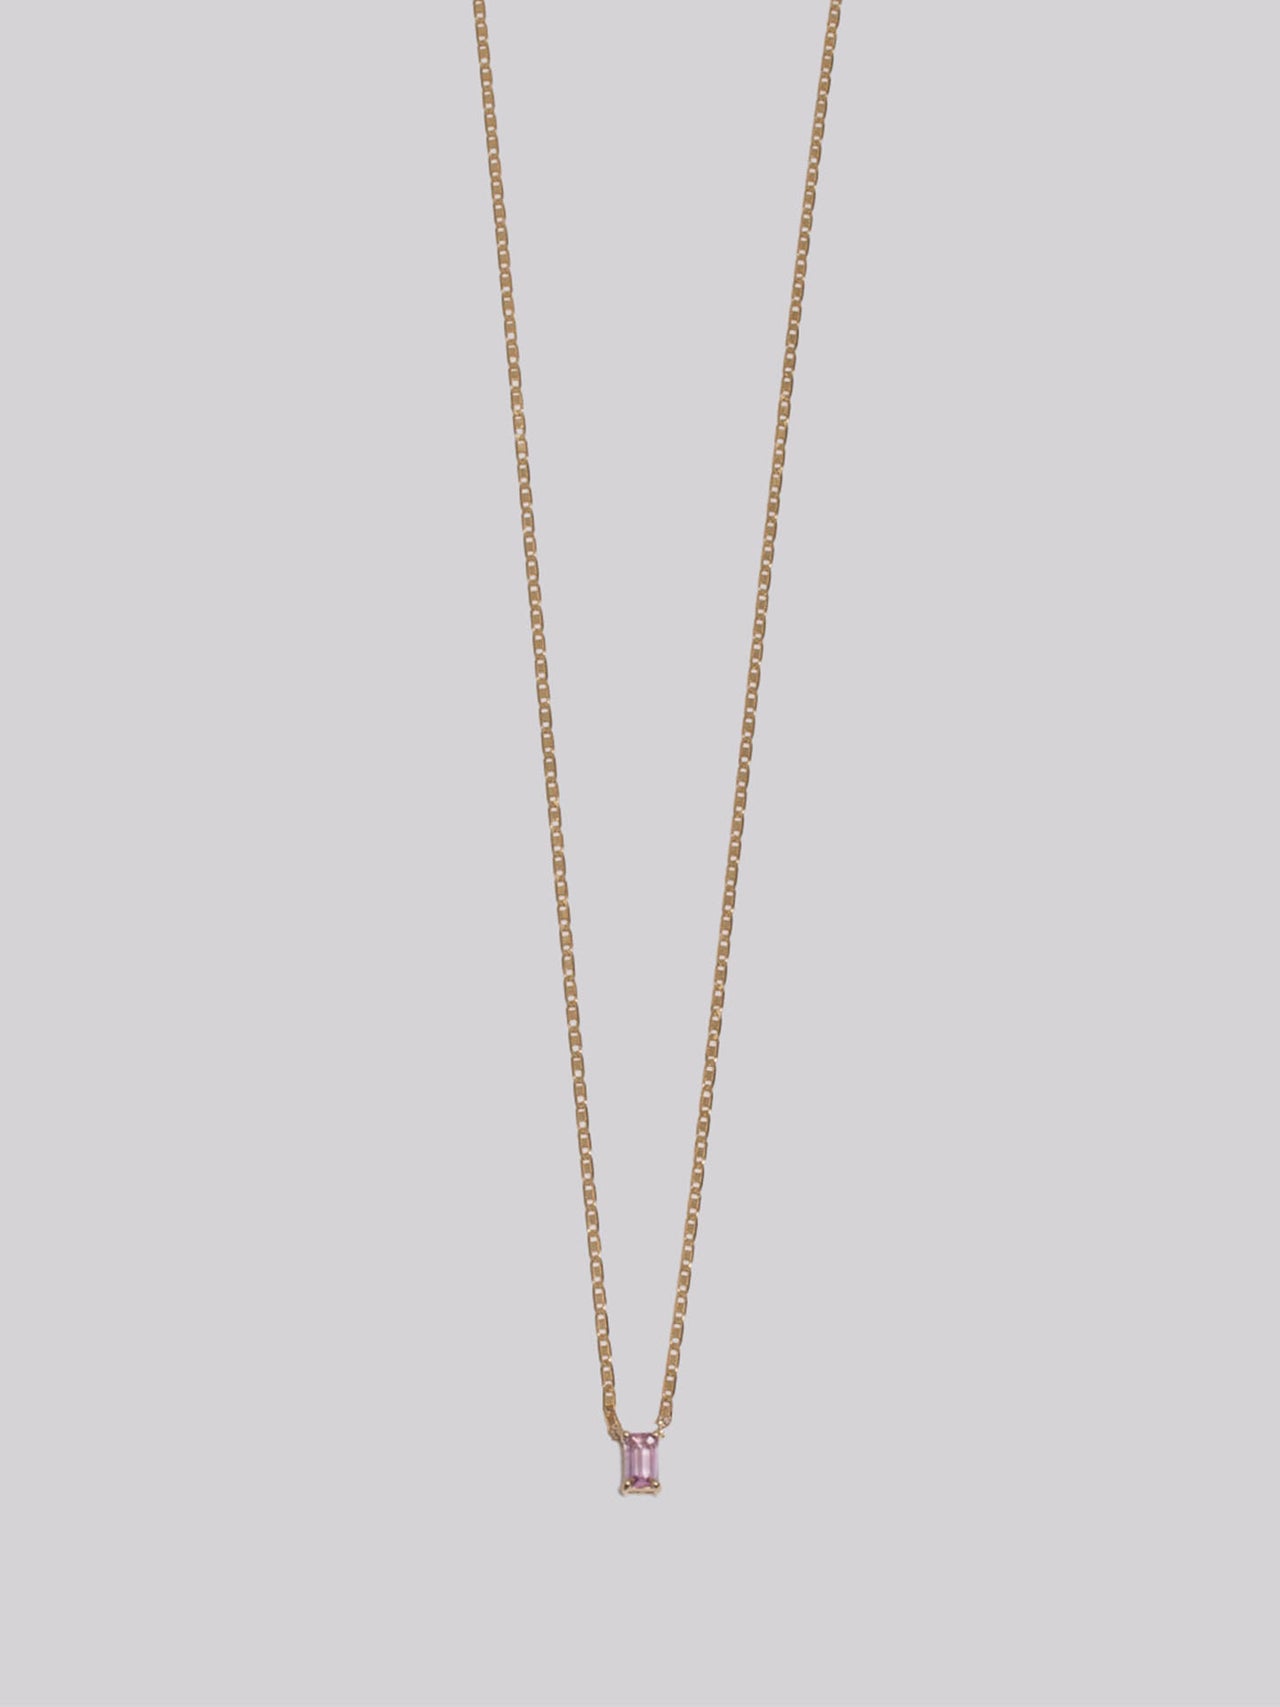 10k Yellow Gold Sapphire Valentino Necklace pictured on light grey background. 